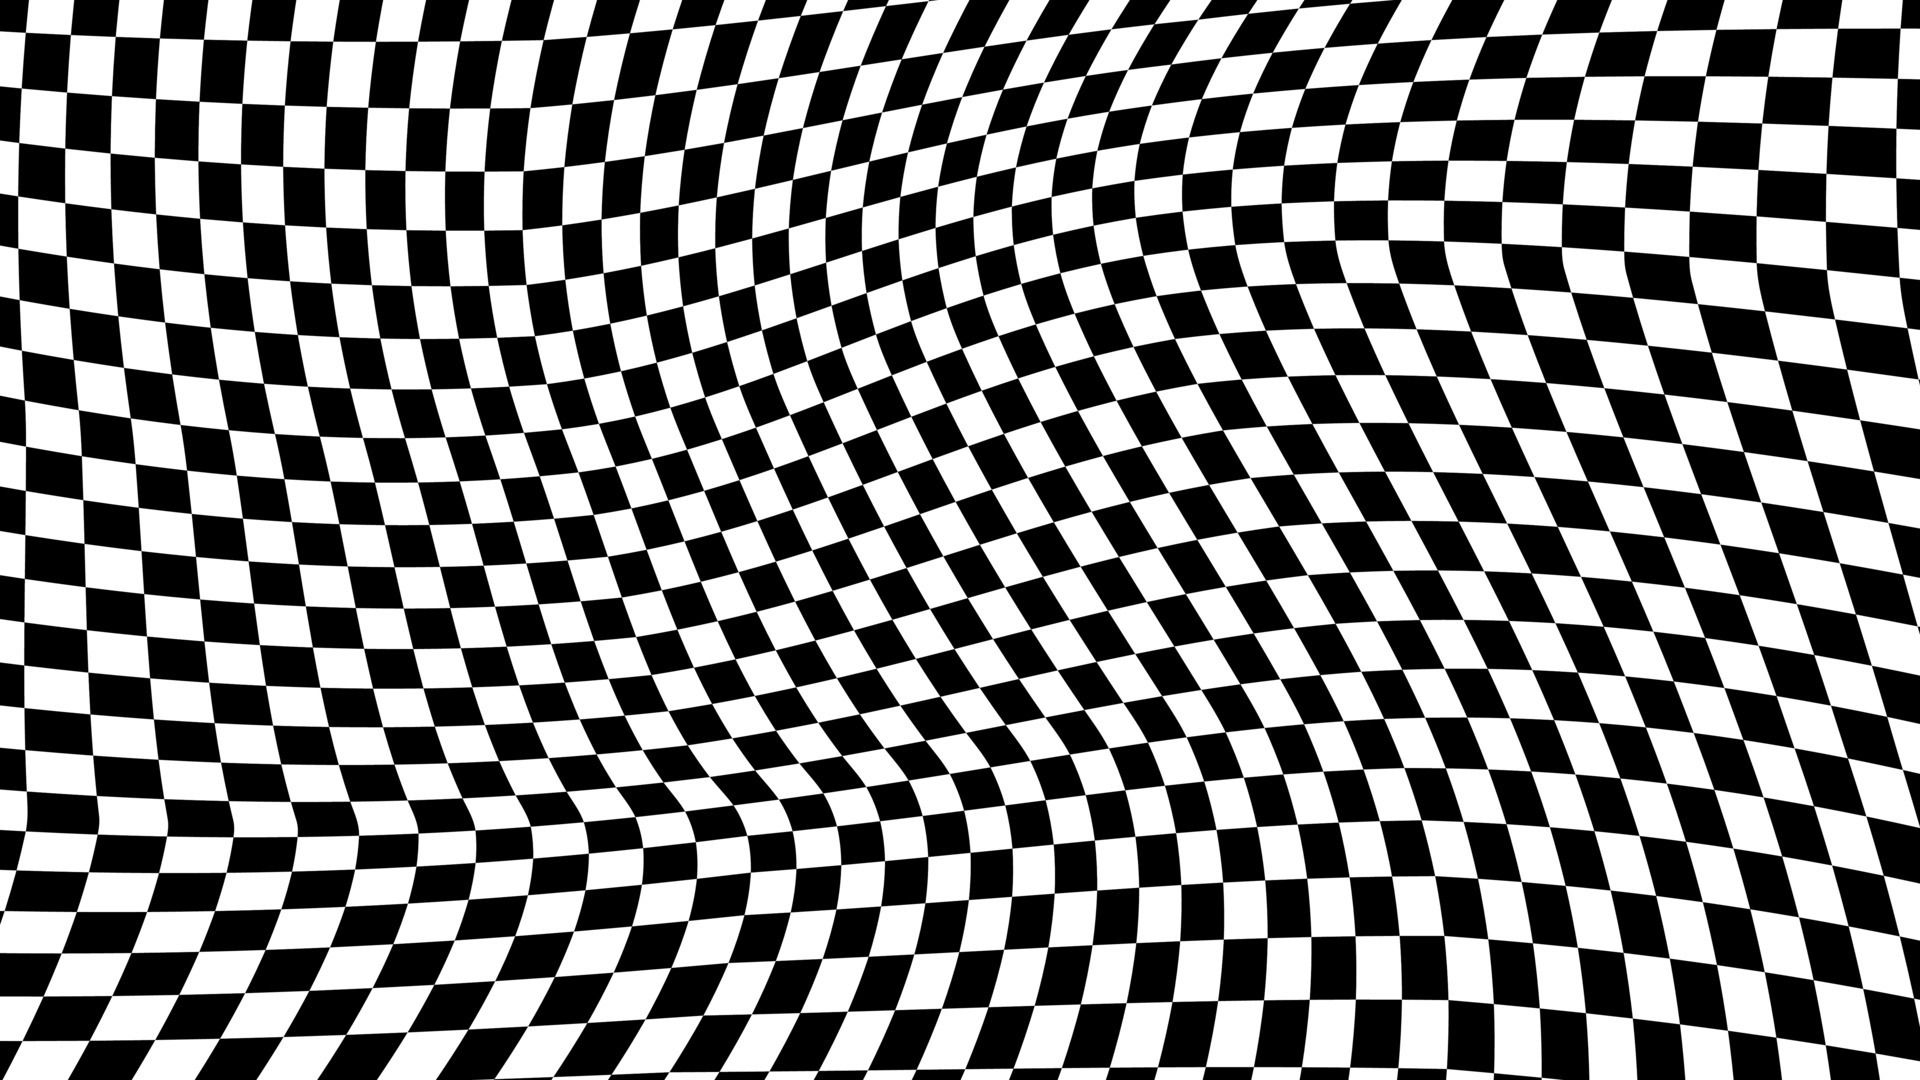 aesthetic black checkerboard distorted checkered wallpaper illustration, perfect for wallpaper, backdrop, postcard, background